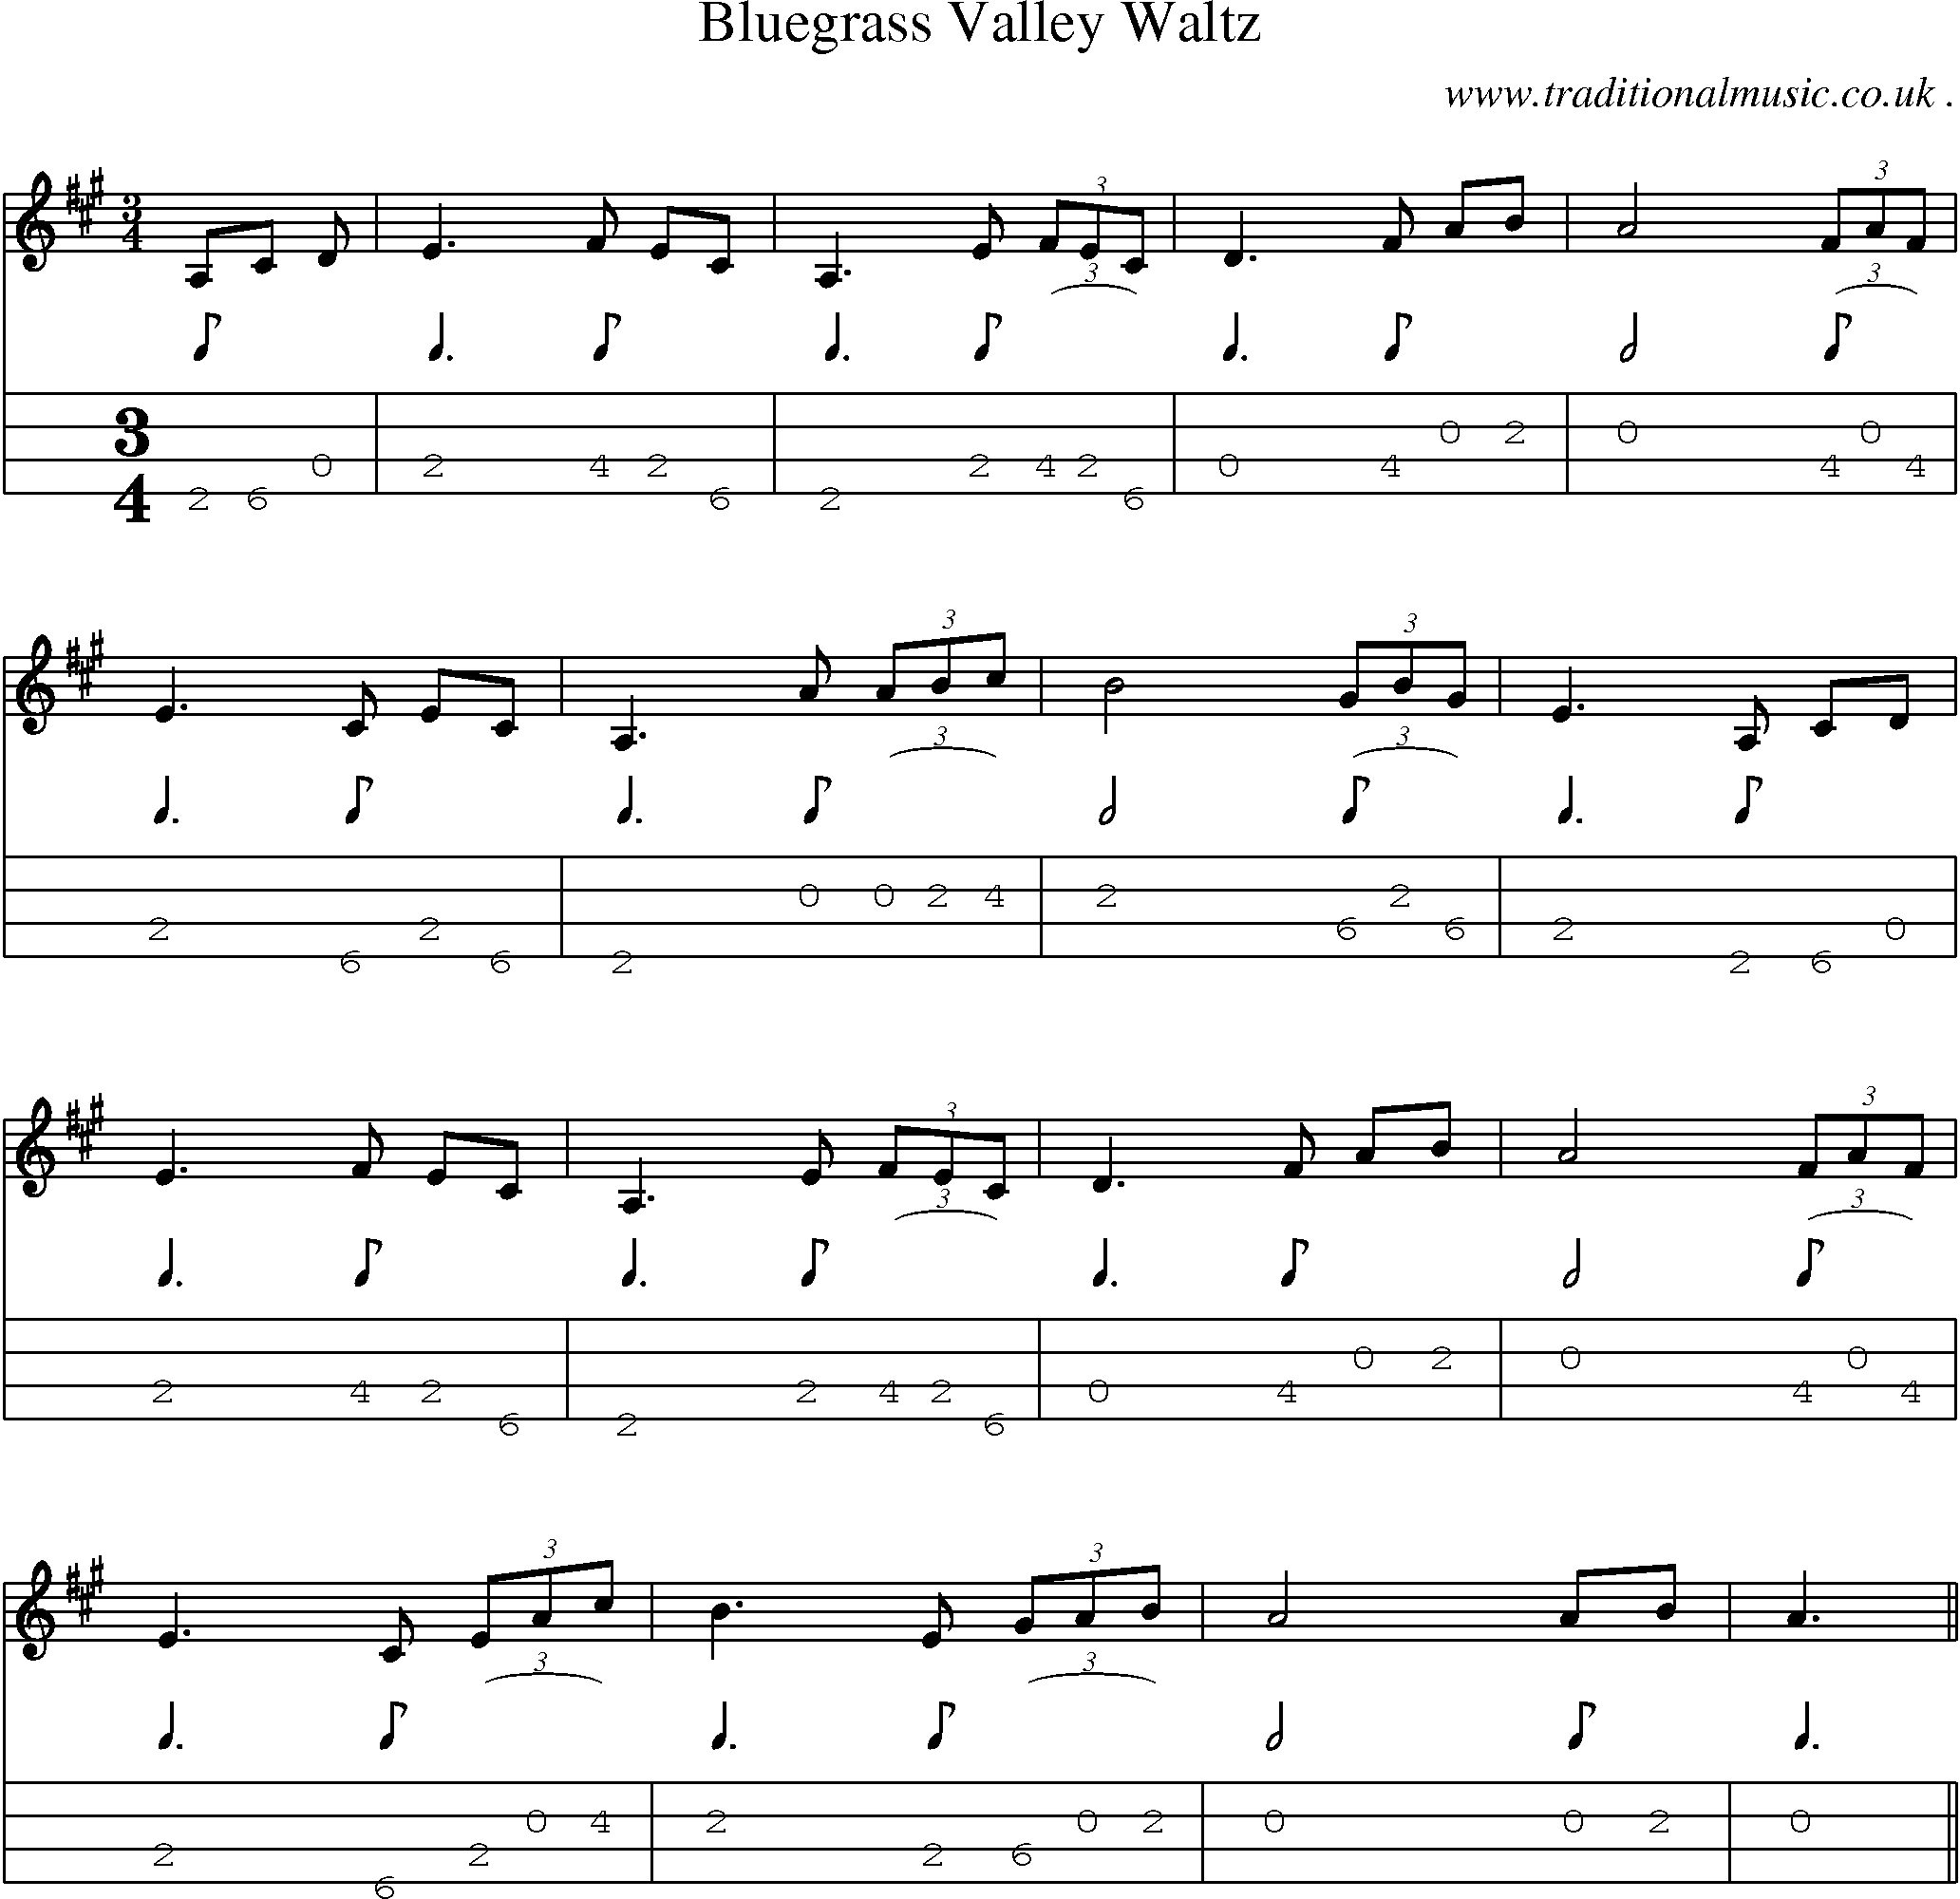 Music Score and Mandolin Tabs for Bluegrass Valley Waltz